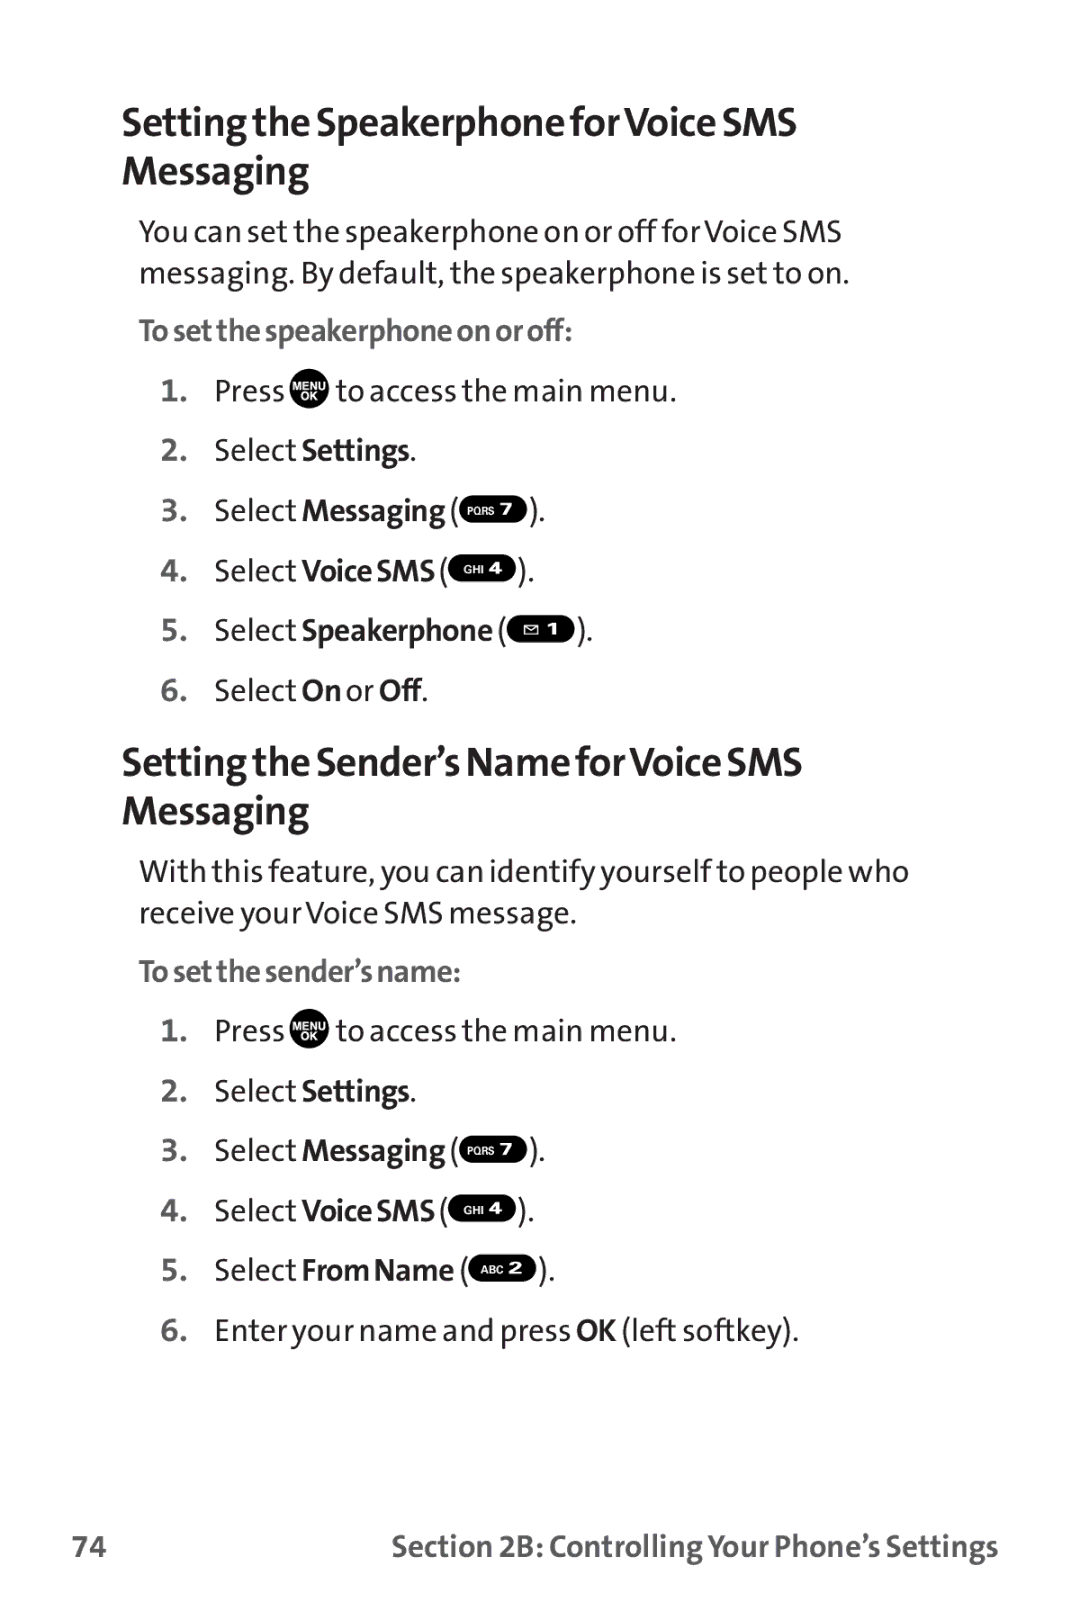 Sanyo MM-9000 manual Setting the Speakerphone forVoice SMS Messaging, Setting the Sender’s Name forVoice SMS Messaging 